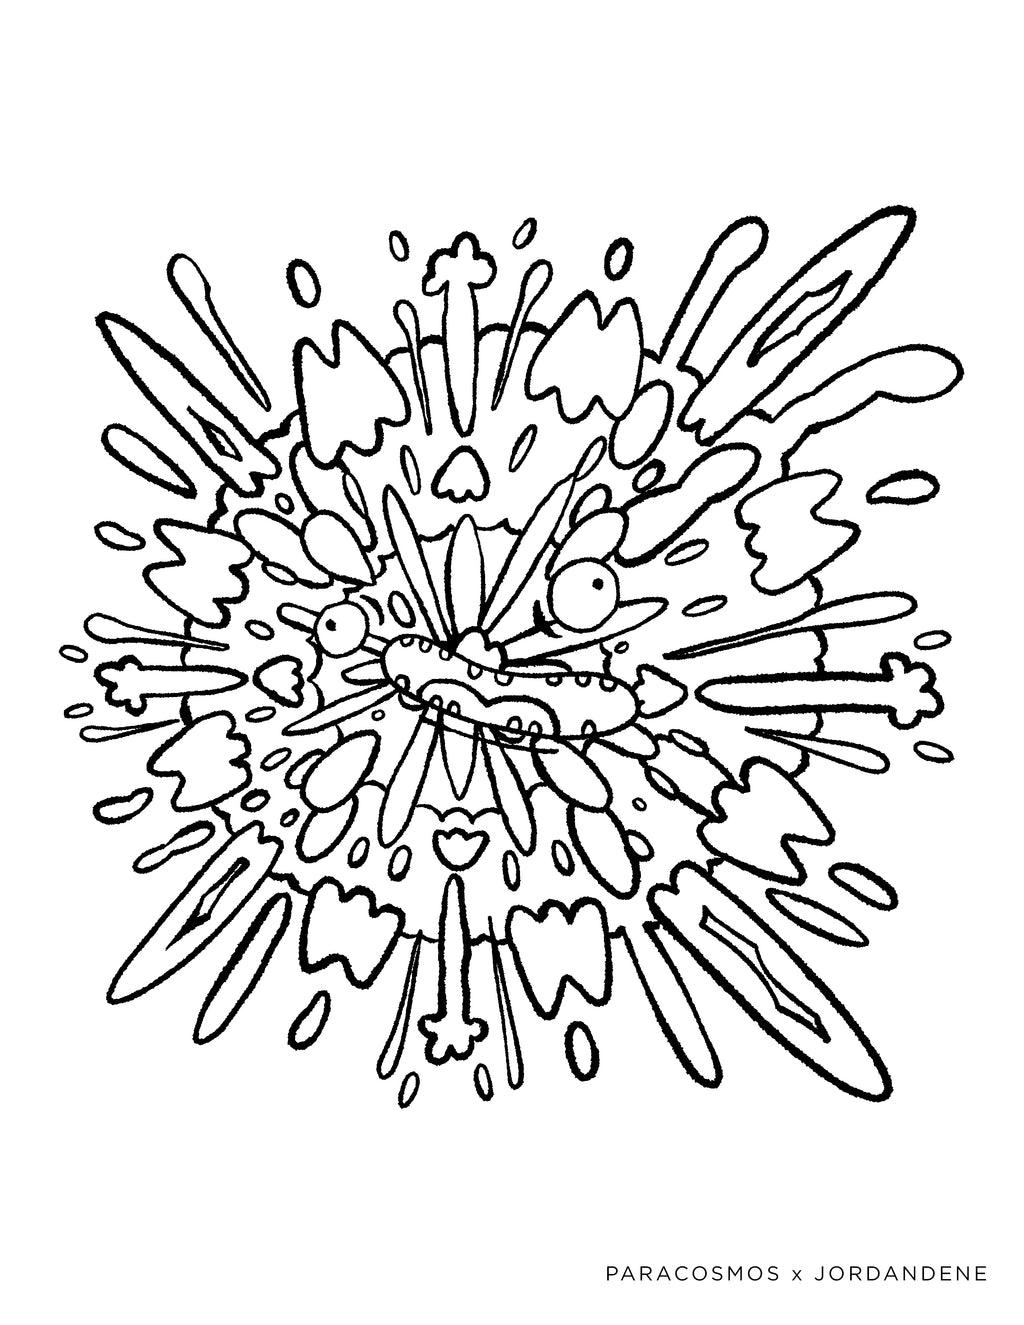 Spacesplosion Free Coloring Page